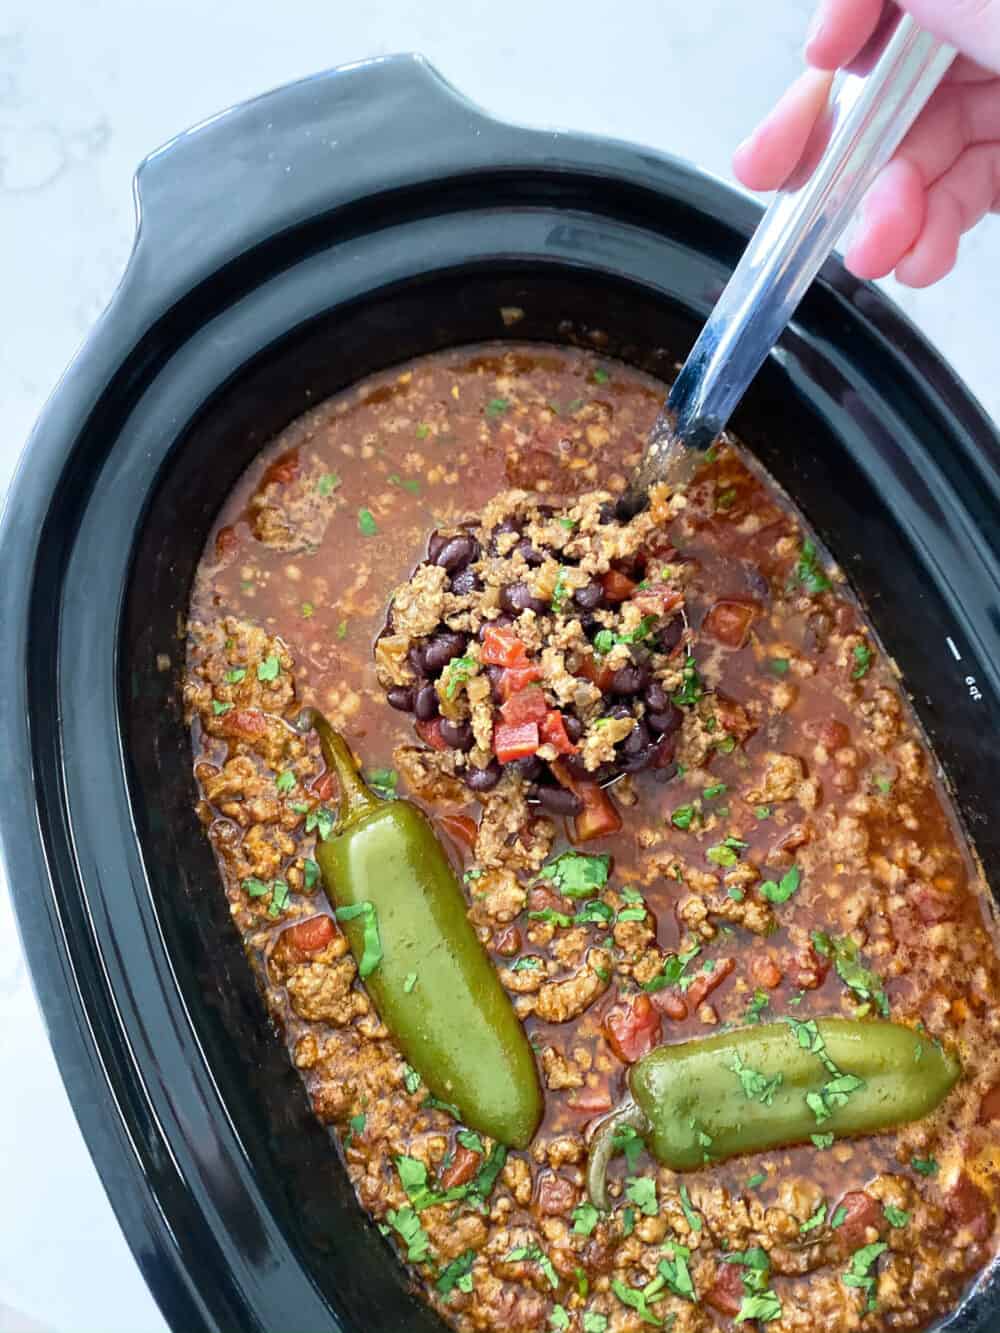 Easy Slow Cooker Chili Recipe The Best Homemade Chili